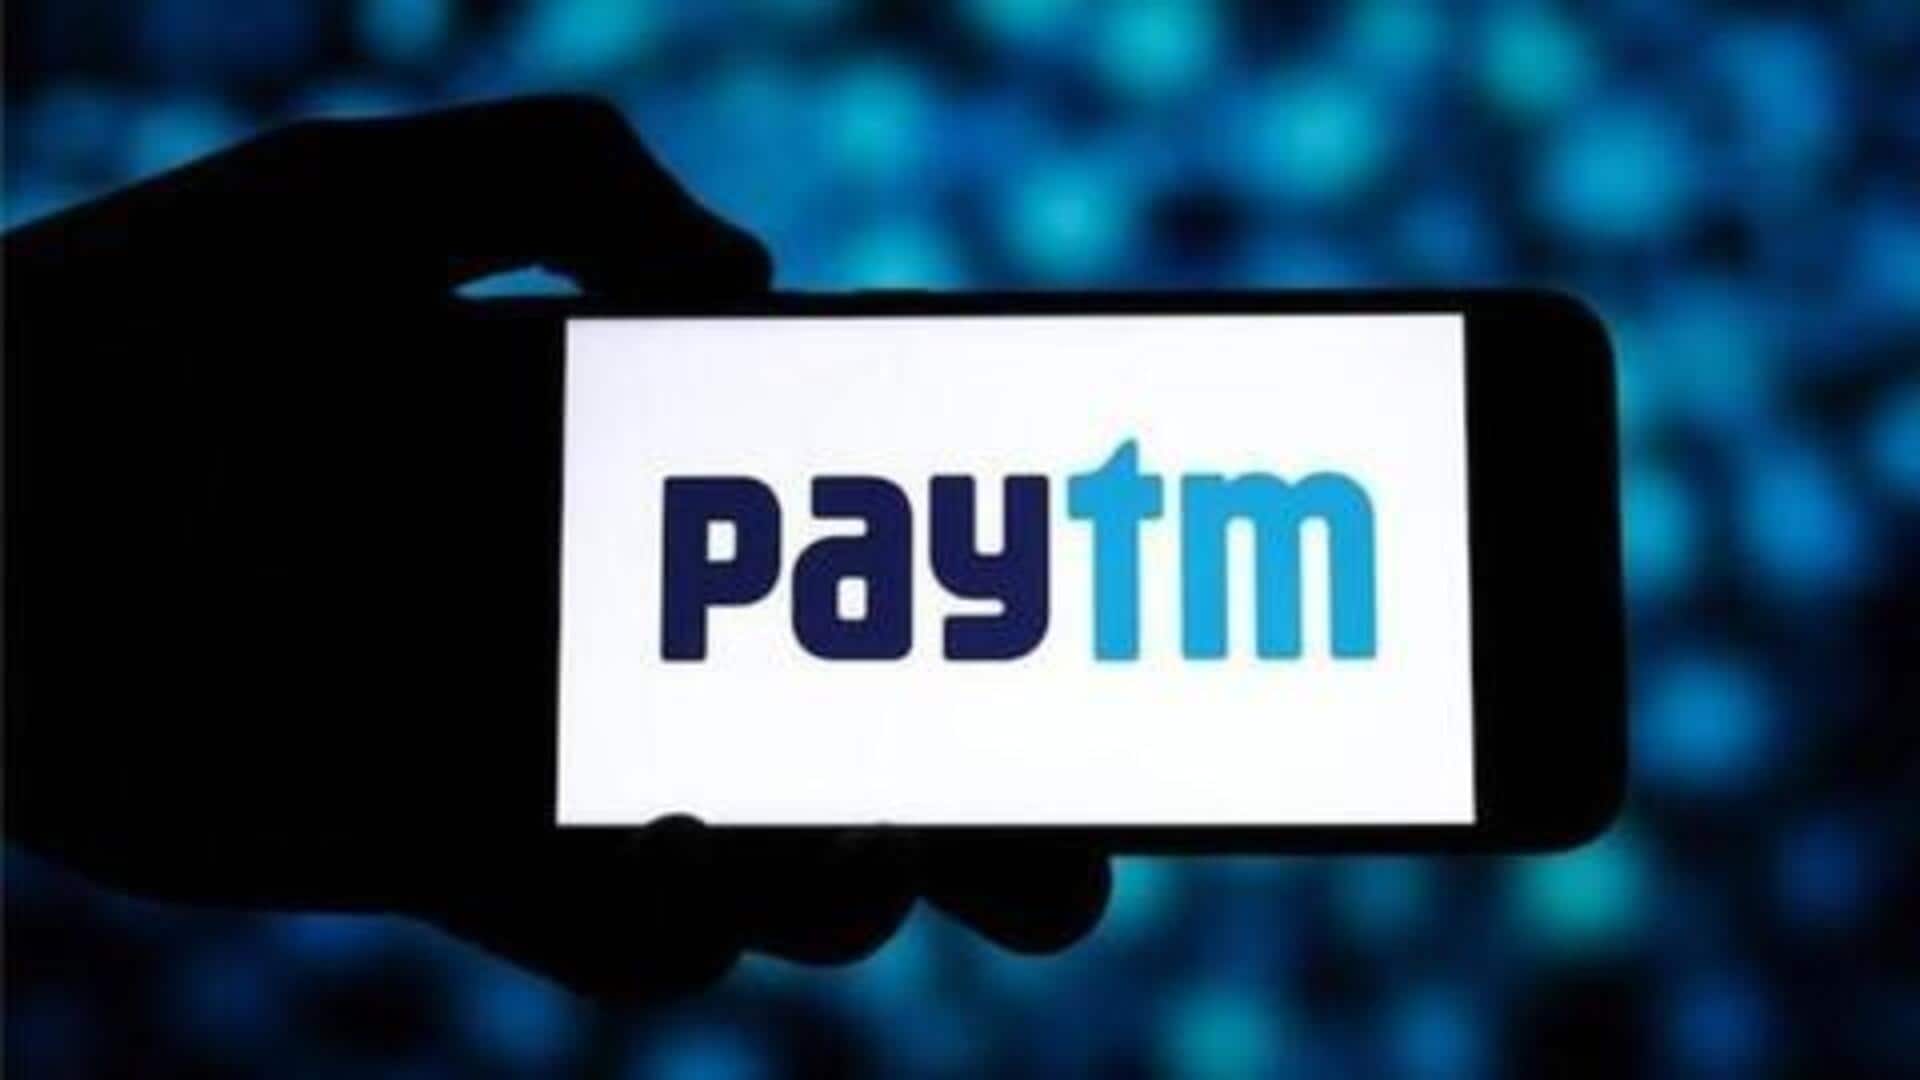 Paytm's bank shuts down tomorrow: What services will be impacted